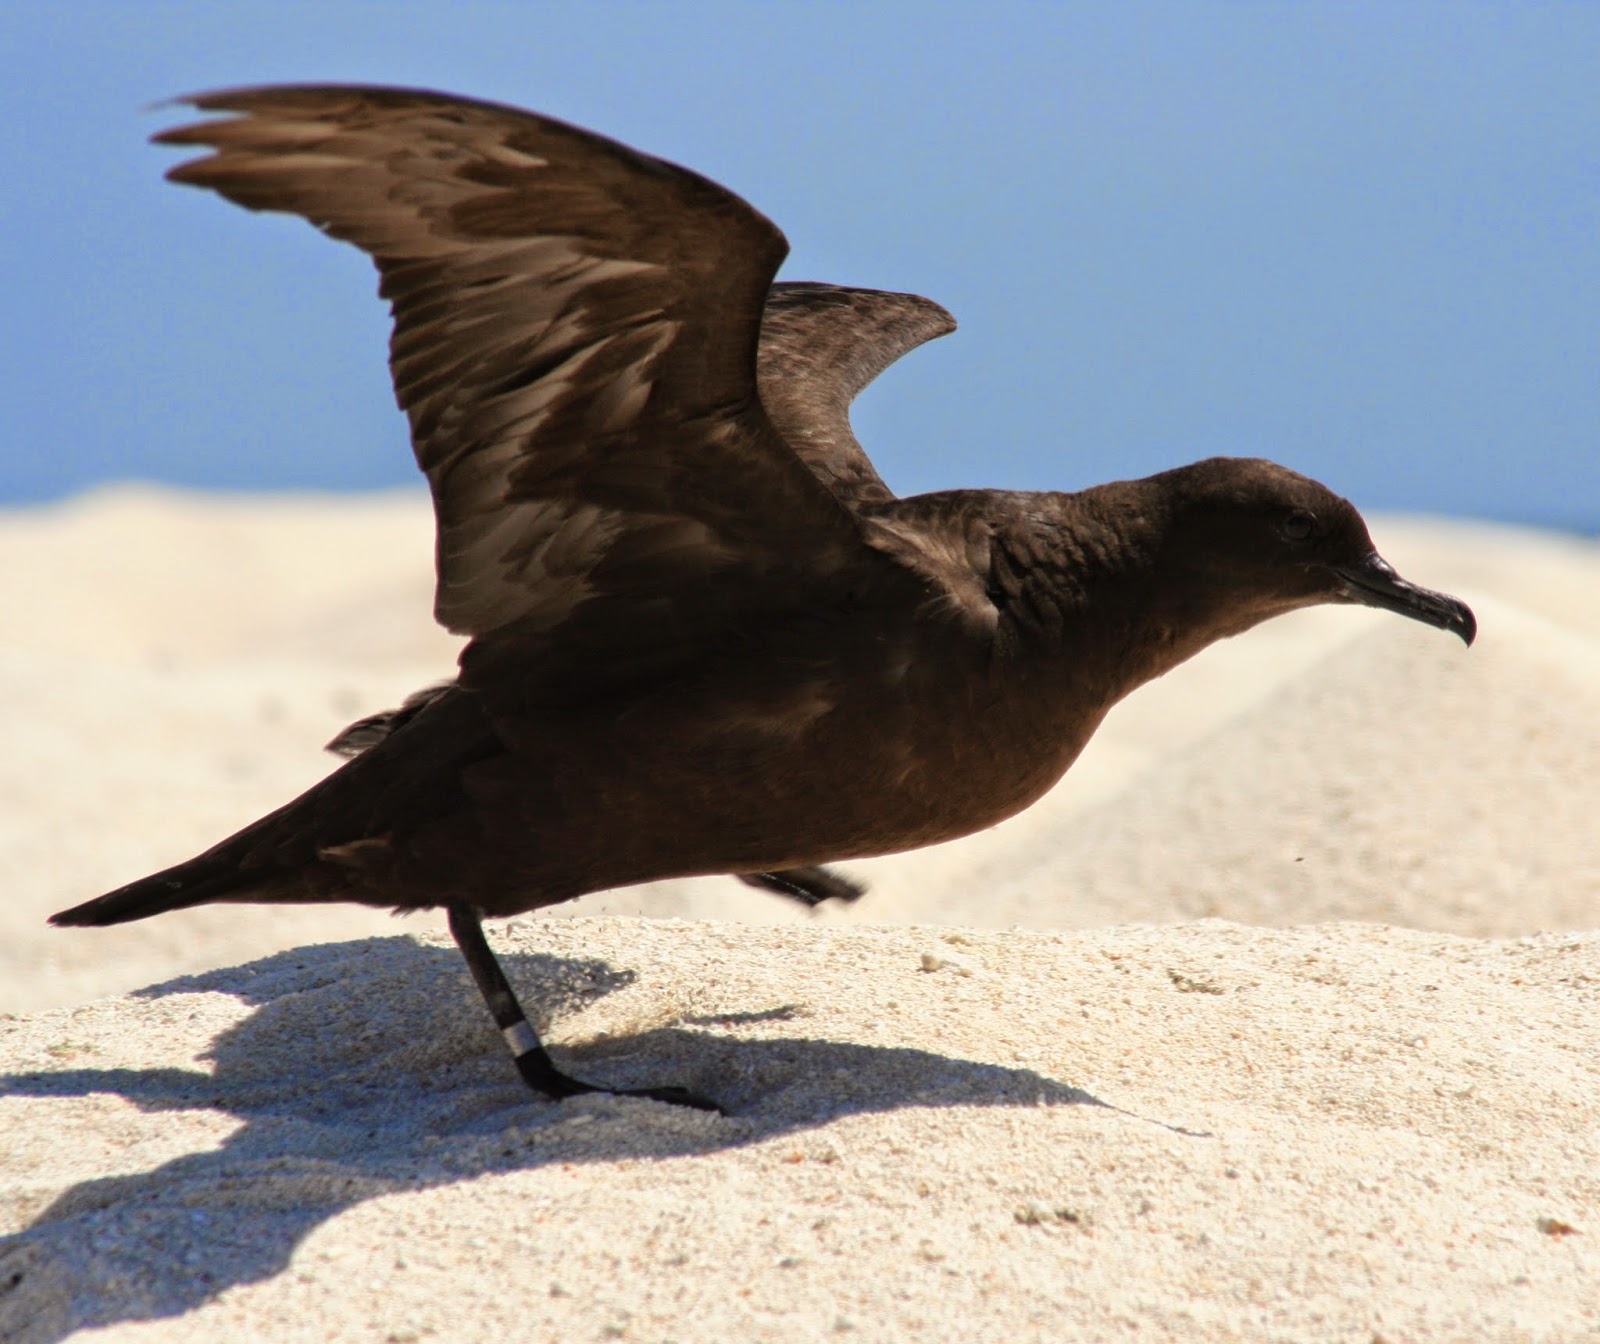 Birds of the World: Christmas shearwater